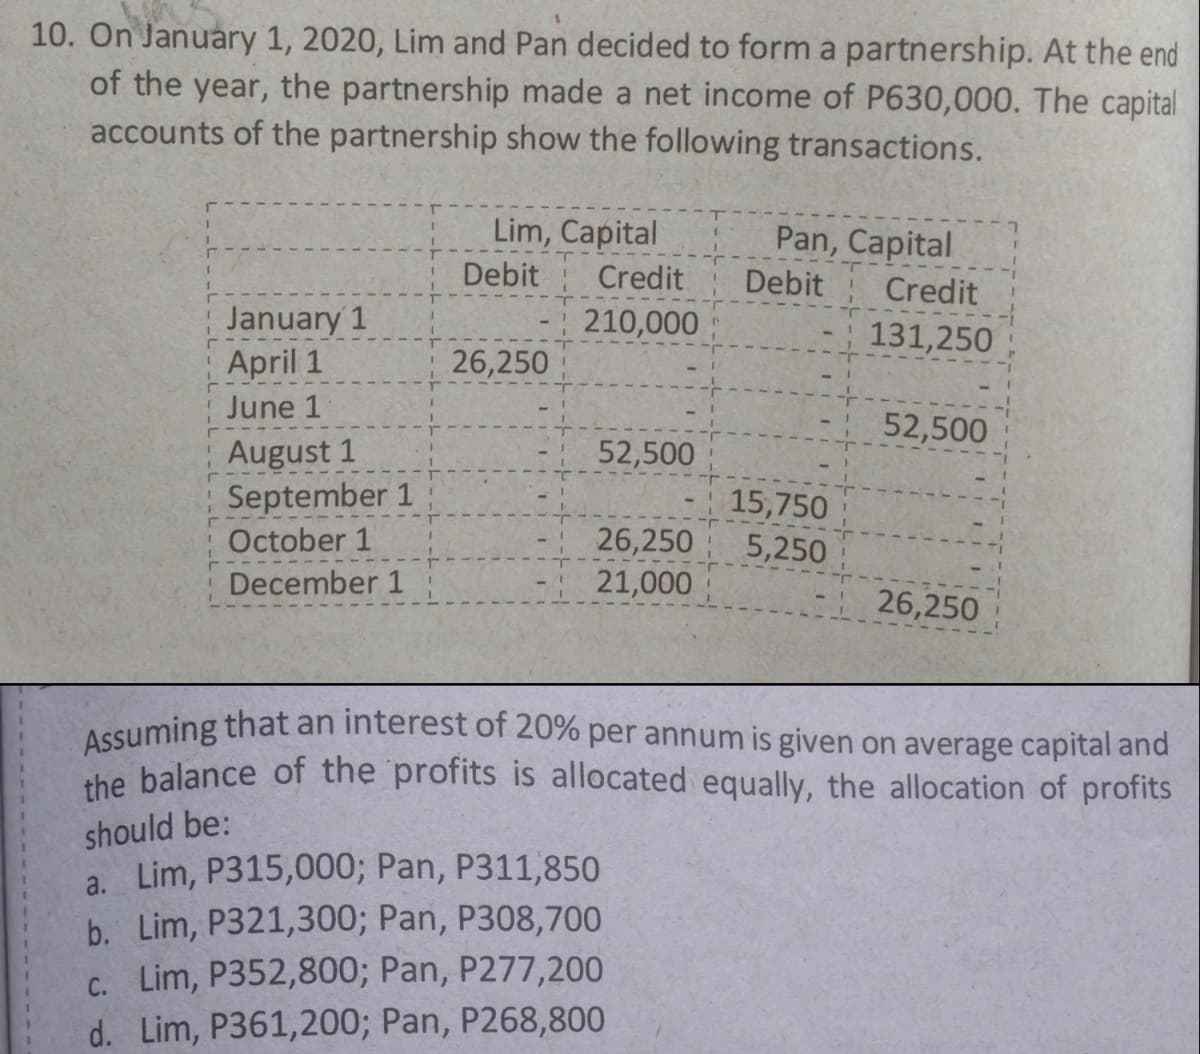 Assuming that an interest of 20% per annum is given on average capital and
10. On January 1, 2020, Lim and Pan decided to form a partnership. At the end
of the year, the partnership made a net income of P630,000. The capital
accounts of the partnership show the following transactions.
Lim, Capital
Pan, Capital
Debit
Credit
Debit
Credit
January 1
April 1
210,000
131,250
26,250
June 1
52,500
August 1
September 1
52,500
15,750
26,250
21,000
October 1
5,250
December 1
26,250
the balance of the profits is allocated equally, the allocation of profits
should be:
a. Lim, P315,000; Pan, P311,850
b. Lim, P321,300; Pan, P308,700
c. Lim, P352,800; Pan, P277,200
d. Lim, P361,200; Pan, P268,800
